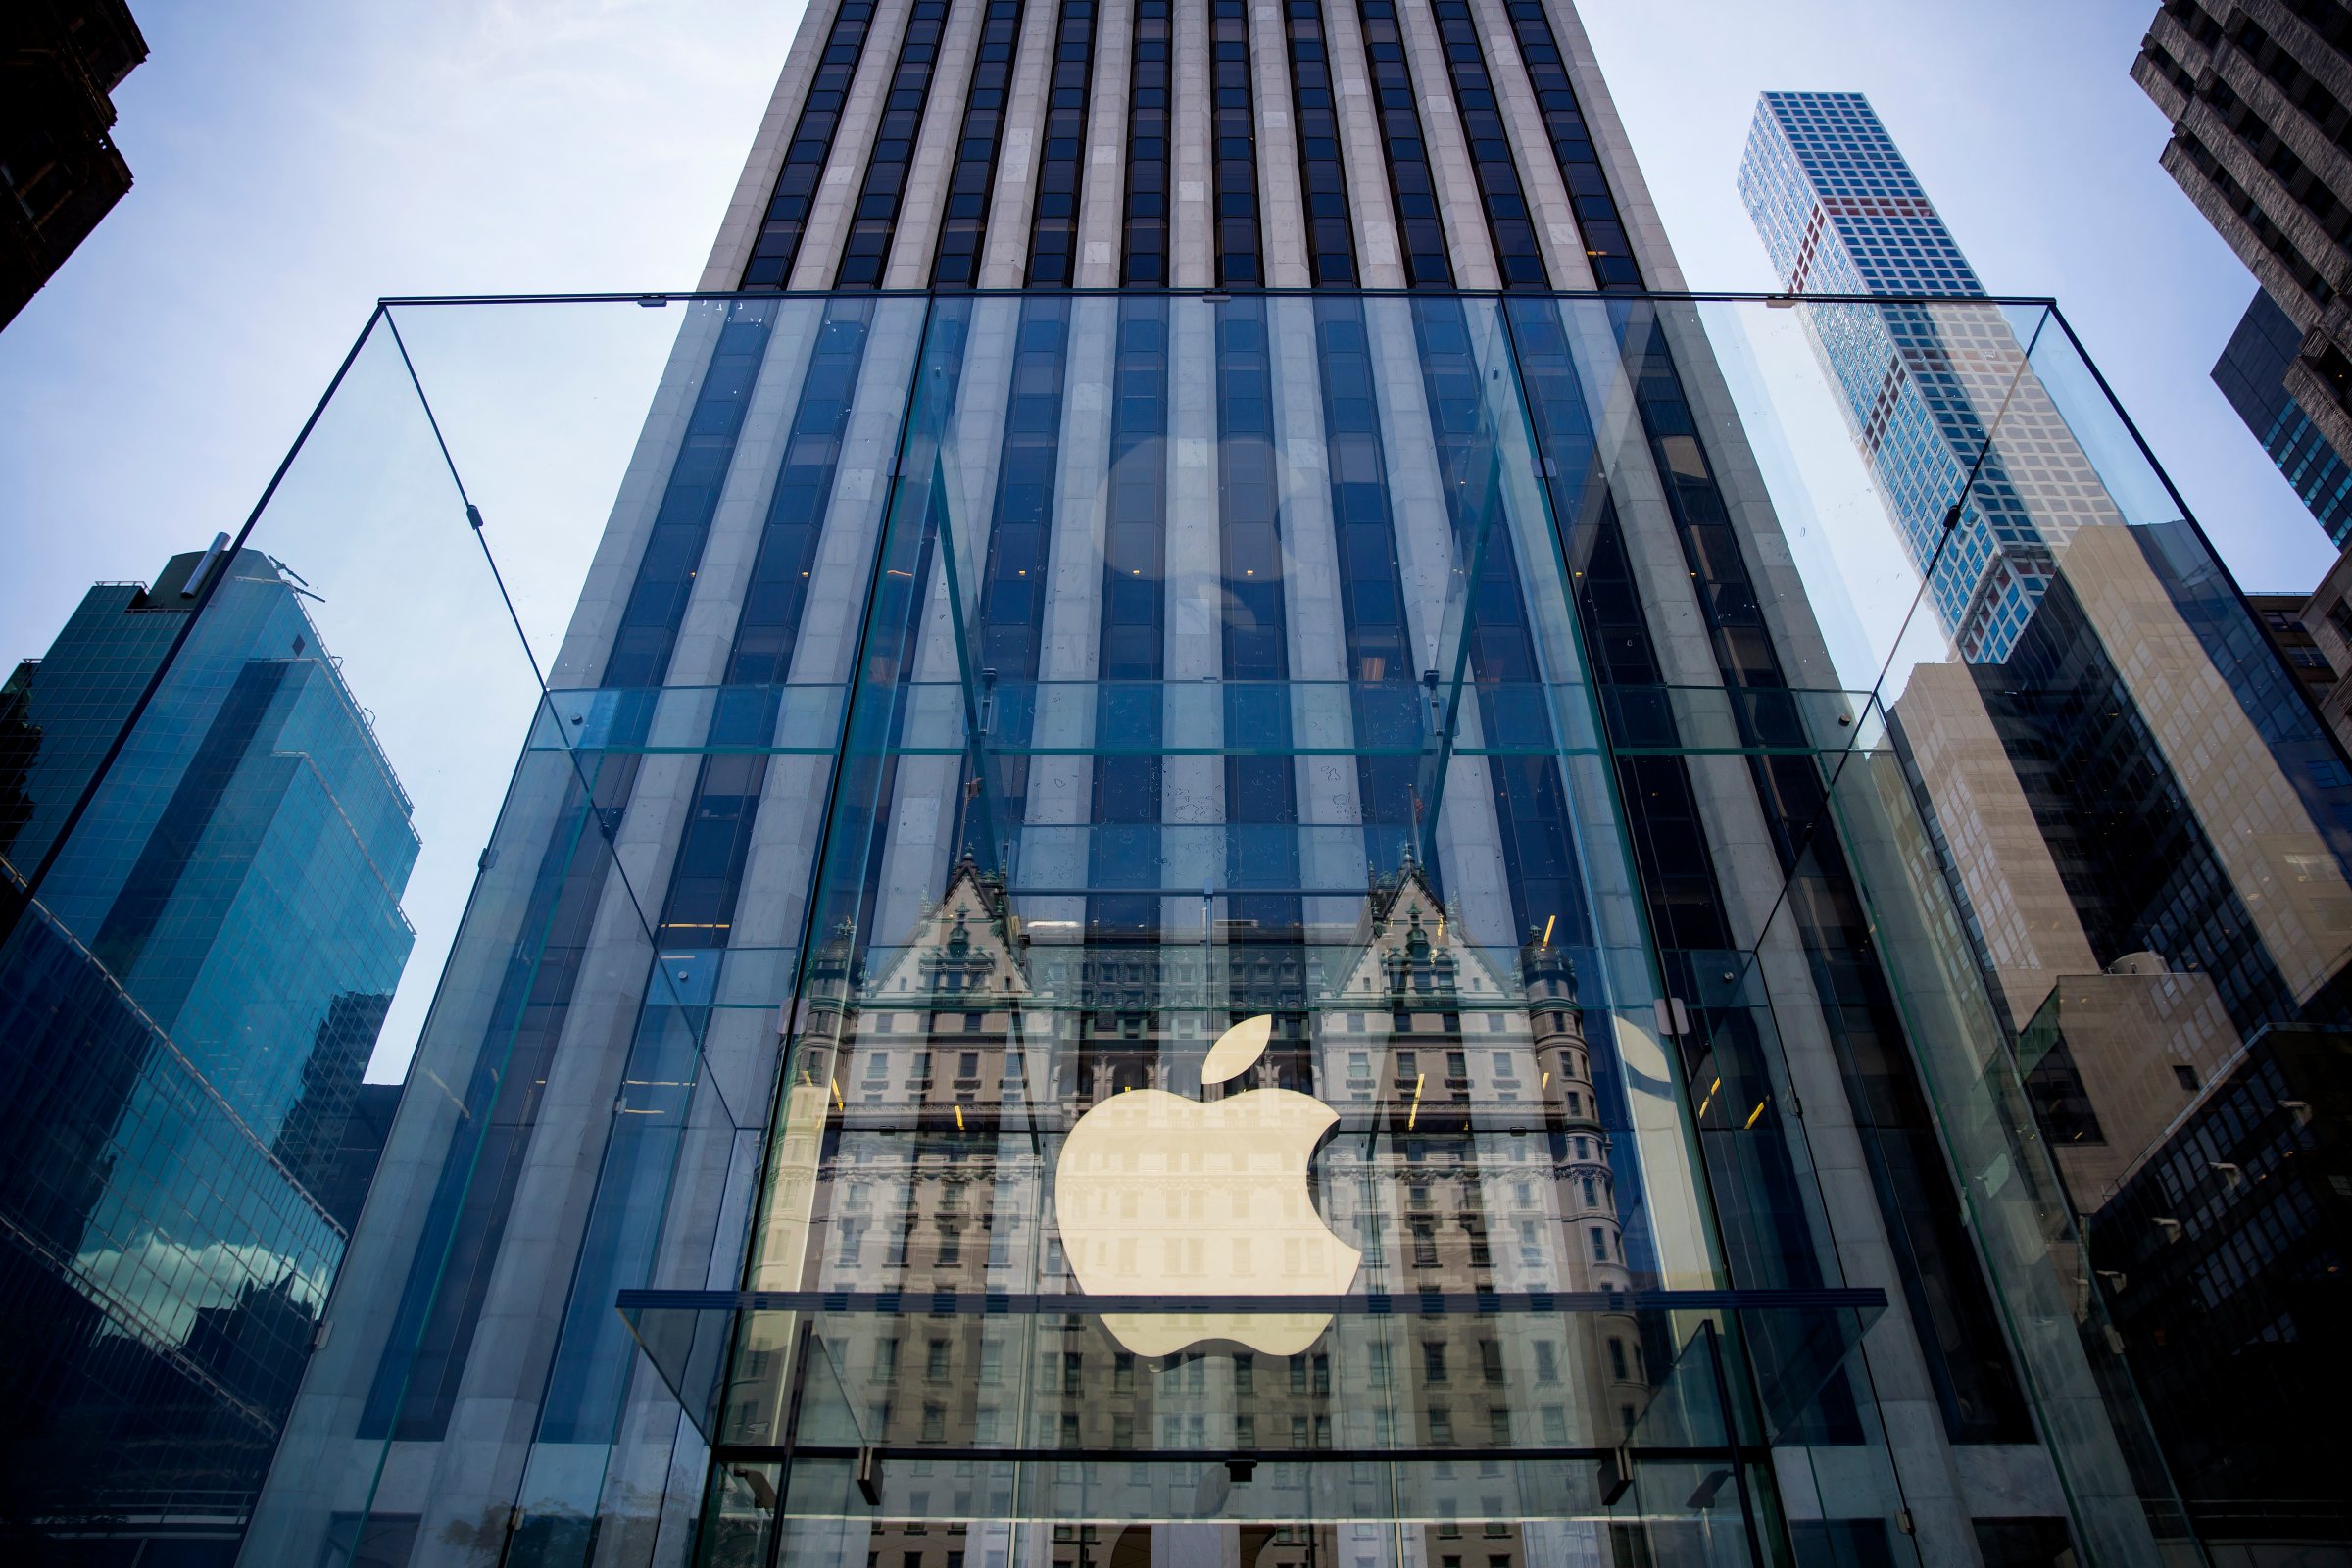 The Apple Store on Fifth Avenue in New York City on June 17, 2015.